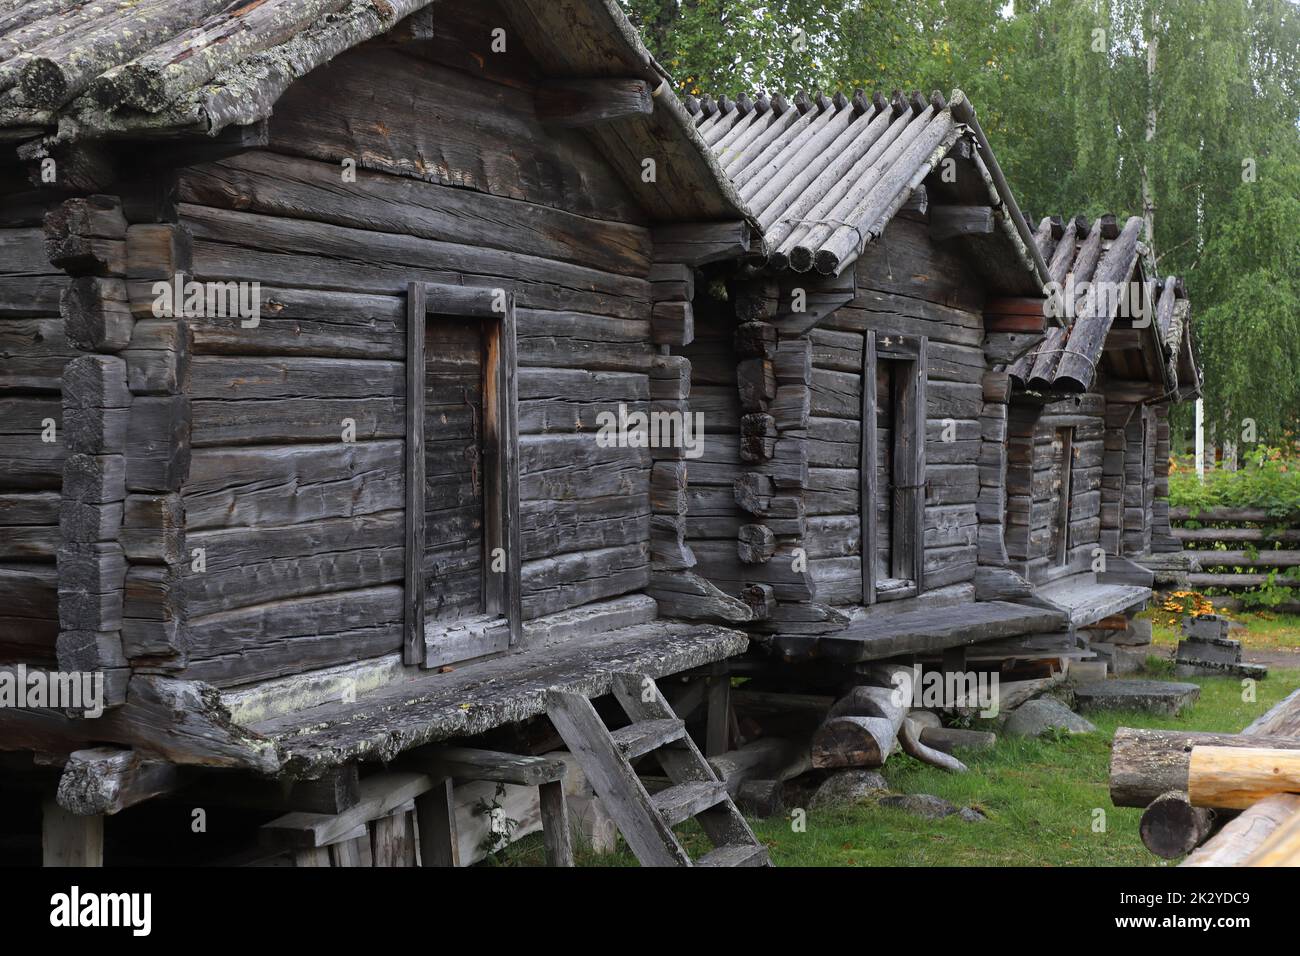 View of buildings in the Arvidsjaur Sami village with overnight wodden church cootages and gåhties. Stock Photo